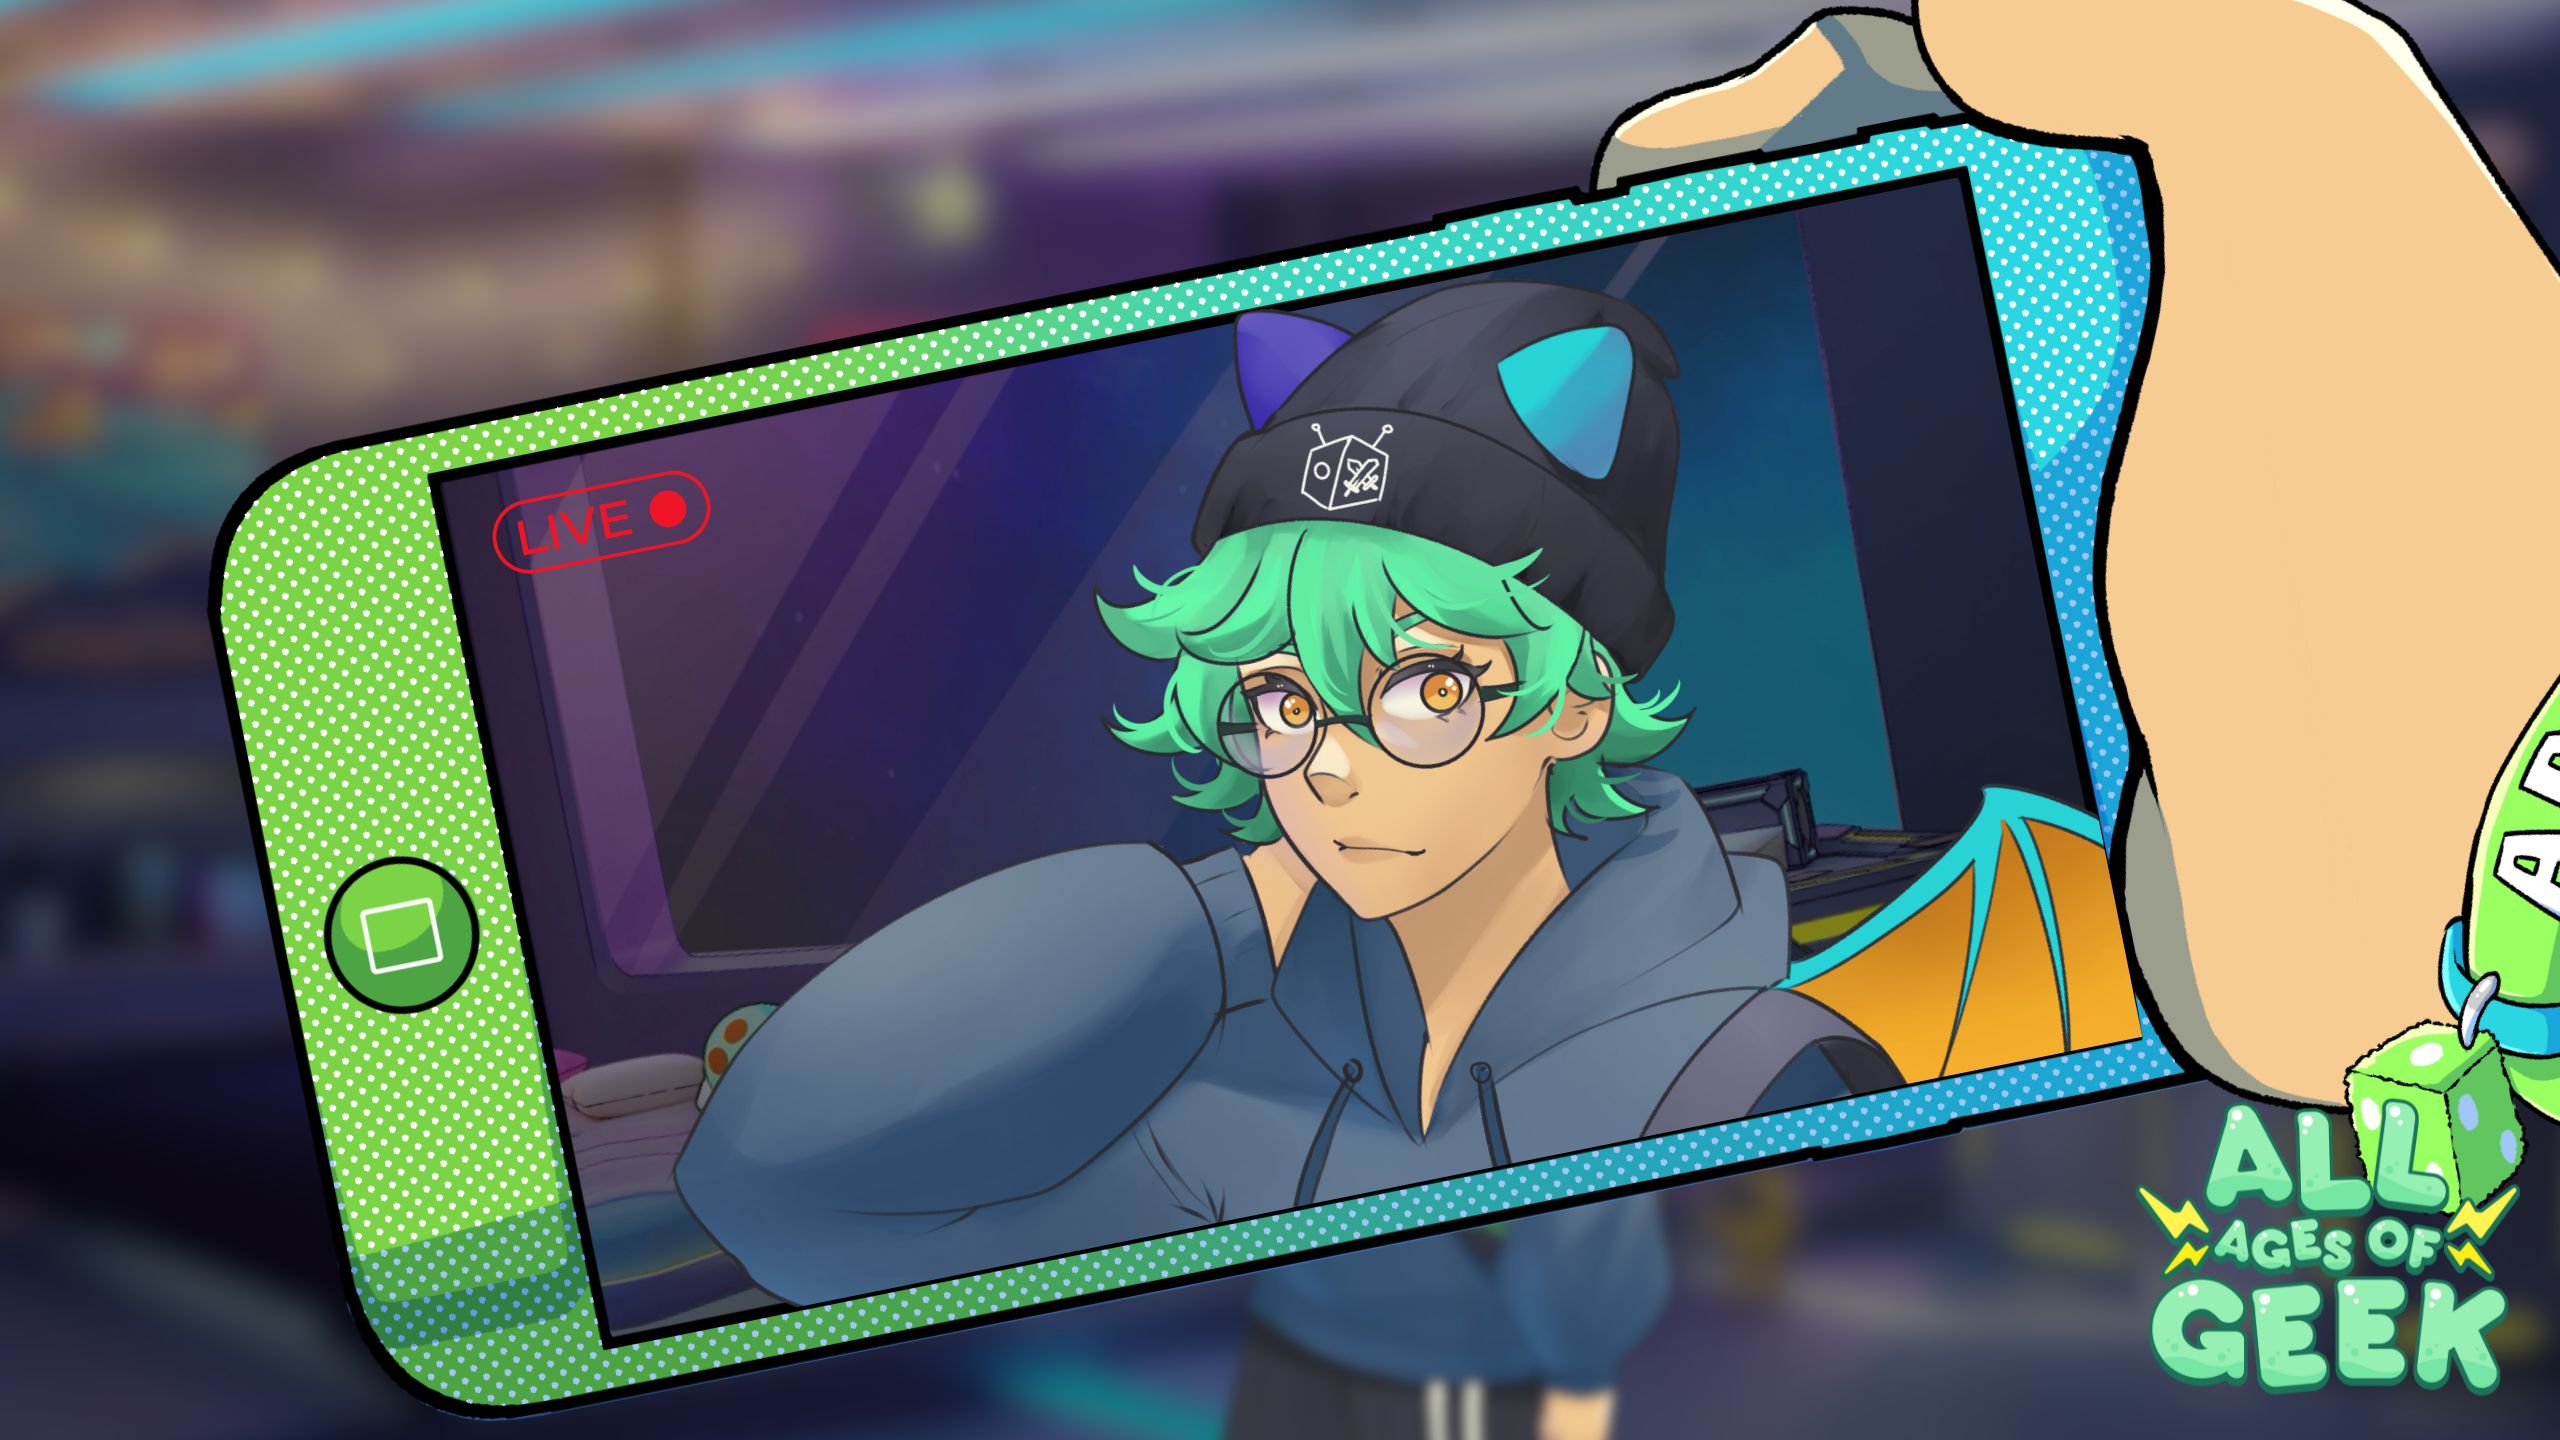 "Illustration of Kasai, a character with green hair, glasses, and dragon horns, wearing a hoodie and beanie. She is live streaming, visible on a smartphone screen, with 'All Ages of Geek' logo in the corner."